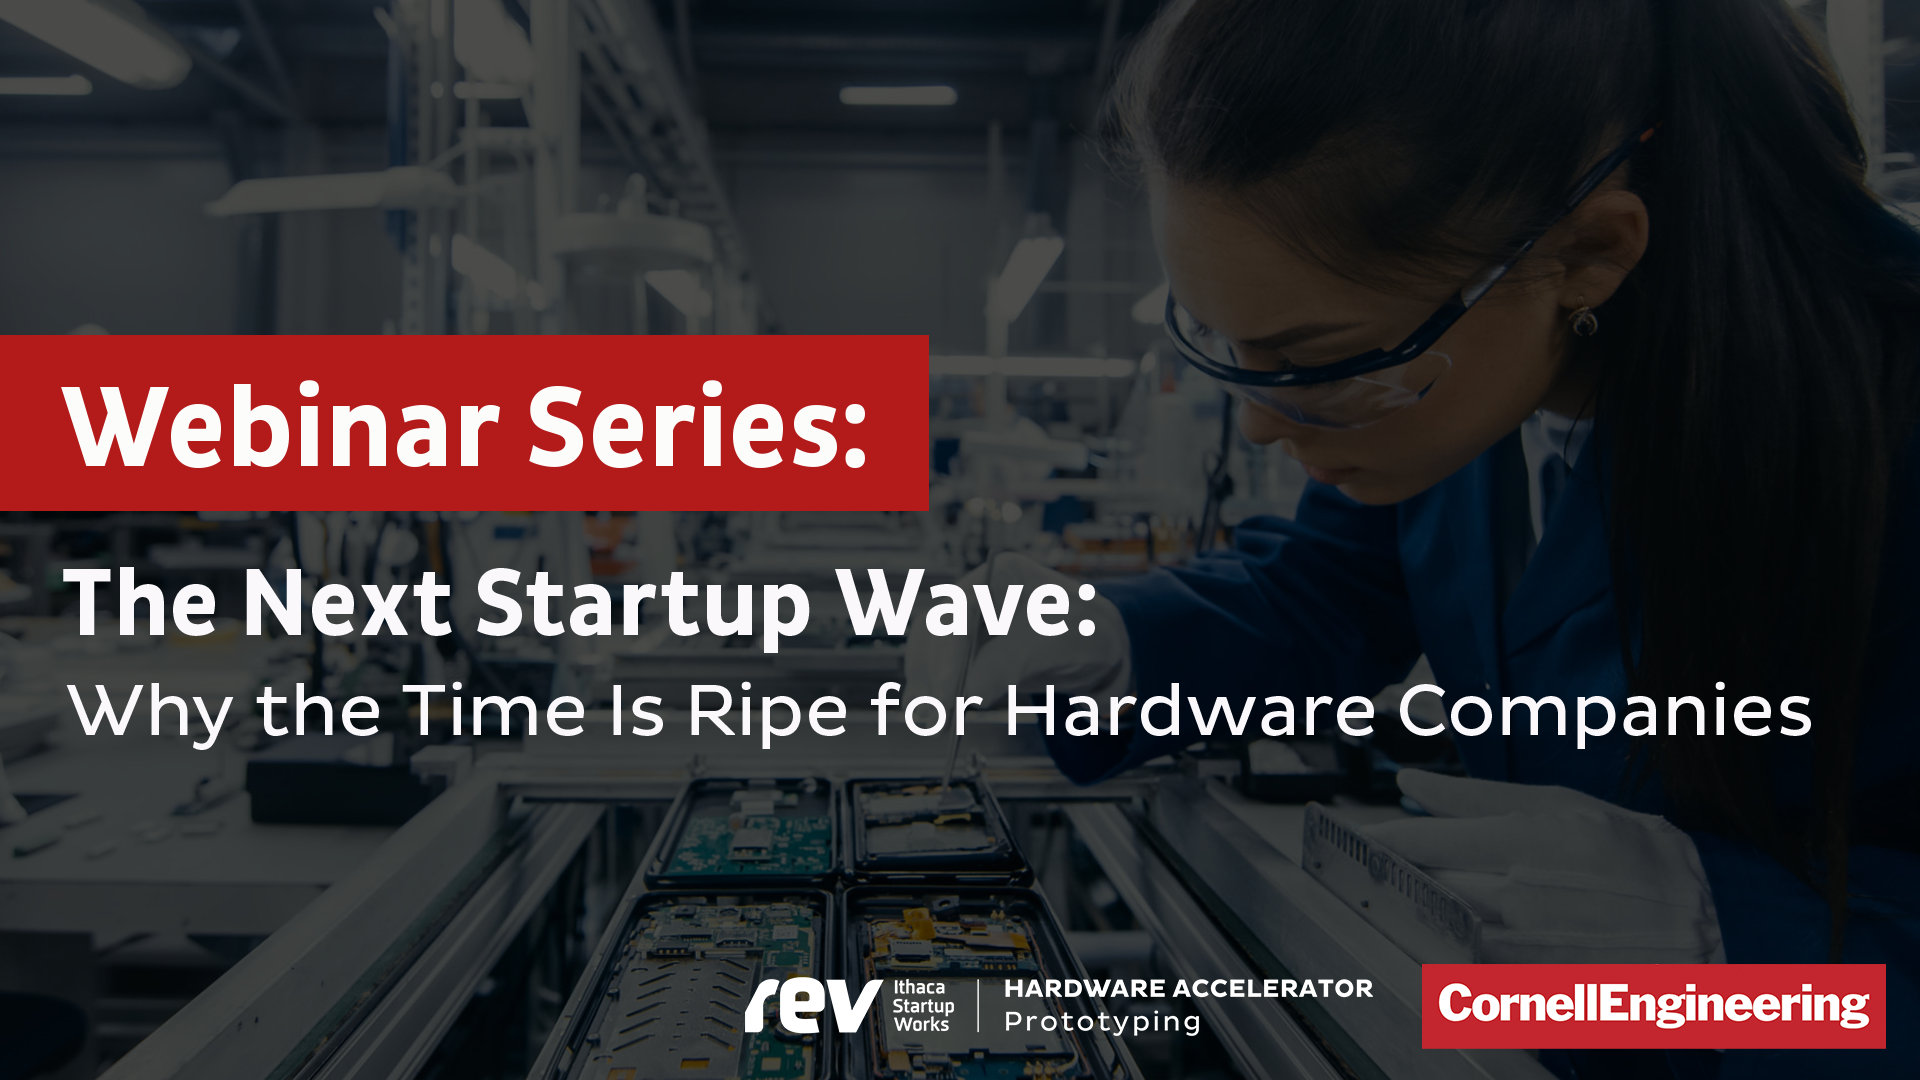 Reads Webinar Series: The Next Startup Wave: Why the Time is Ripe for Hardware Companies. Black gradient in overtop of a woman in a lab. Cornell Engineering logo in the bottom right hand corner.